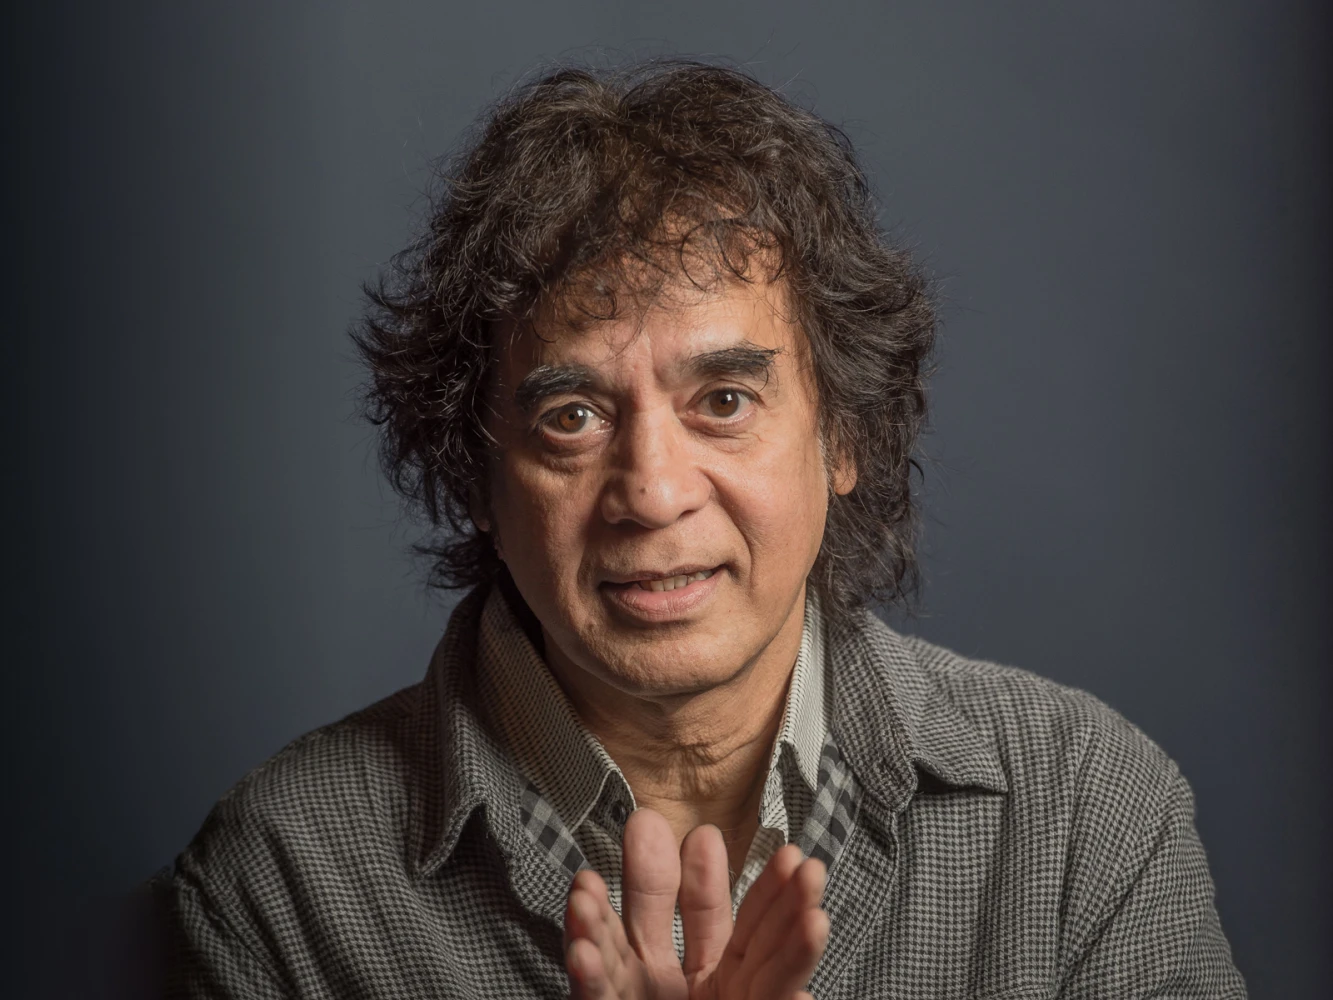 Zakir Hussain and the Masters of Percussion: What to expect - 2